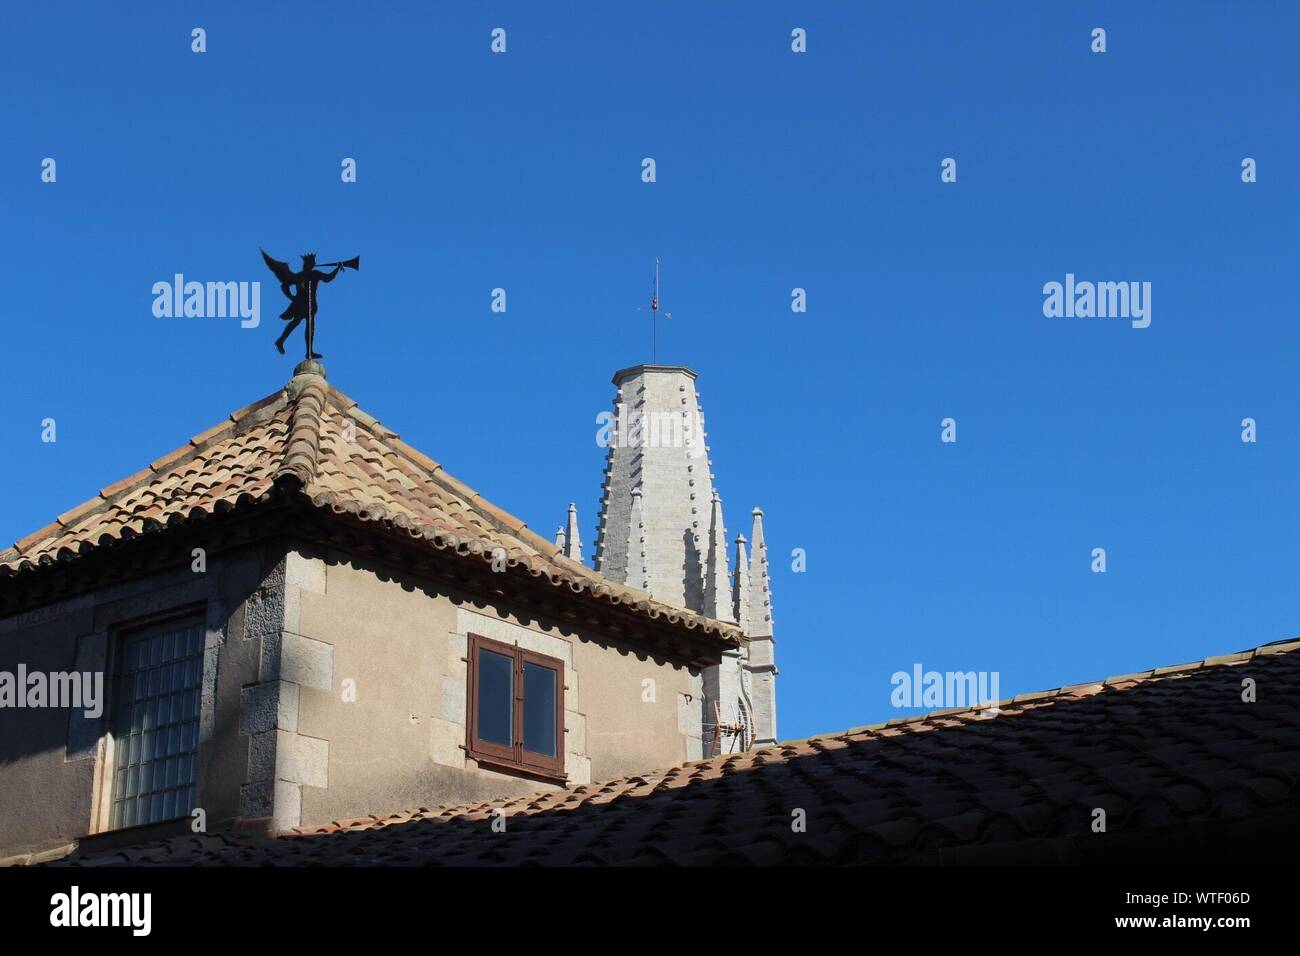 Low Angle View Of Weather Vane On Roof By Esglesia De Sant Feliu Against Clear Blue Sky Stock Photo